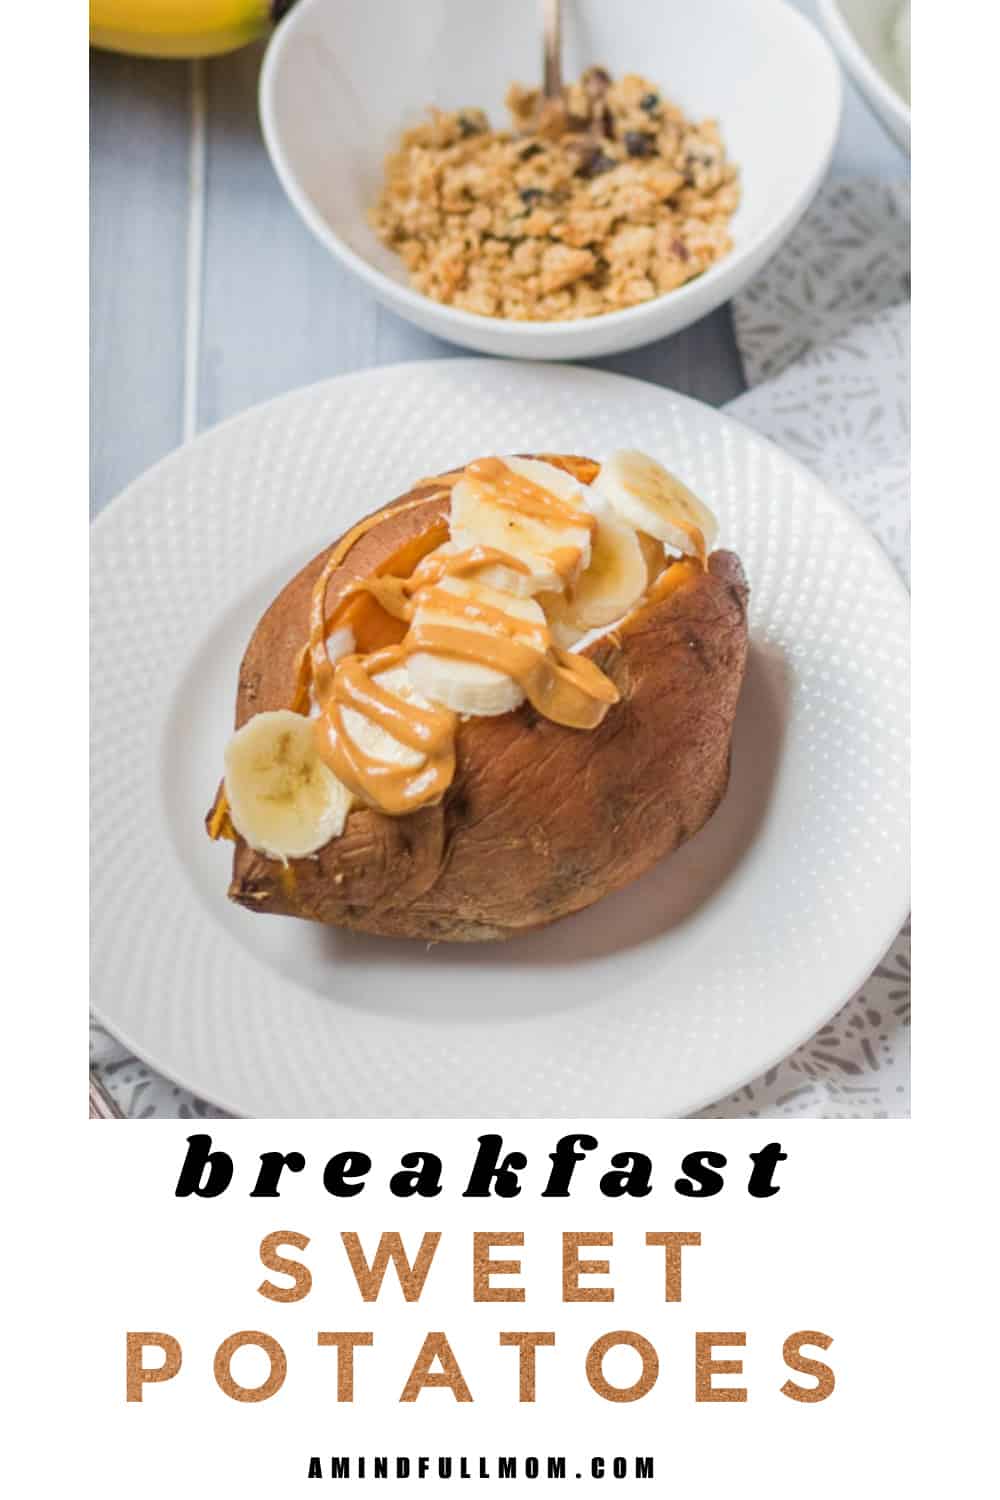 Loaded Breakfast Sweet Potatoes are one of the easiest, healthiest, and most satisfying breakfast recipes. Whether topping with fruit and yogurt or eggs and sausage, you will love how healthy and filling Breakfast Sweet Potatoes are! They are also a great recipe to prep ahead for quick and easy breakfasts perfect for busy mornings. 